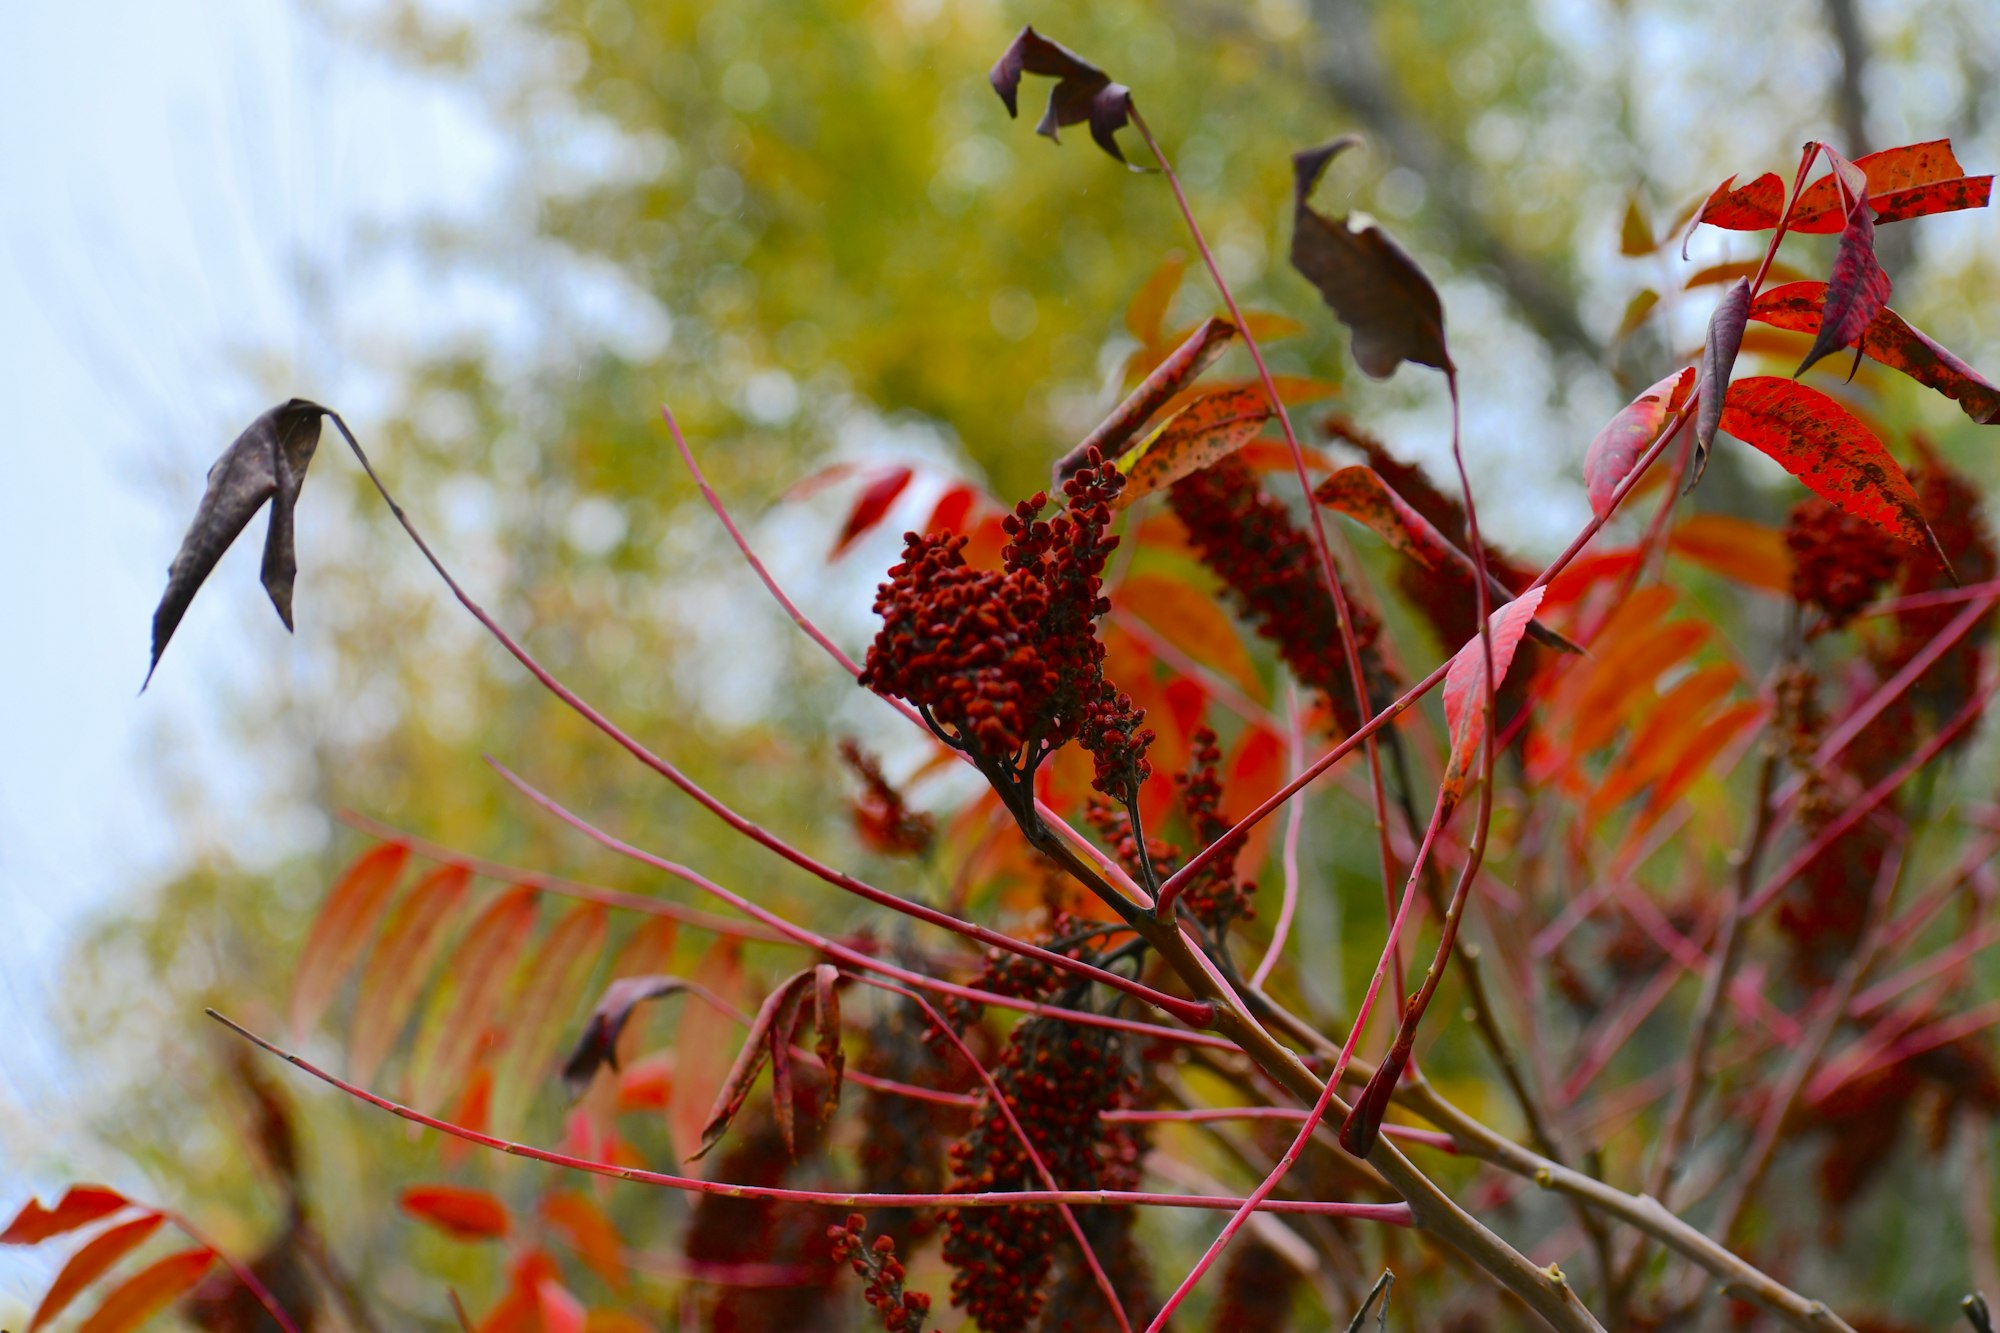 Sumac bunches in Superior National Forest, Ely, Minnesota, USA.